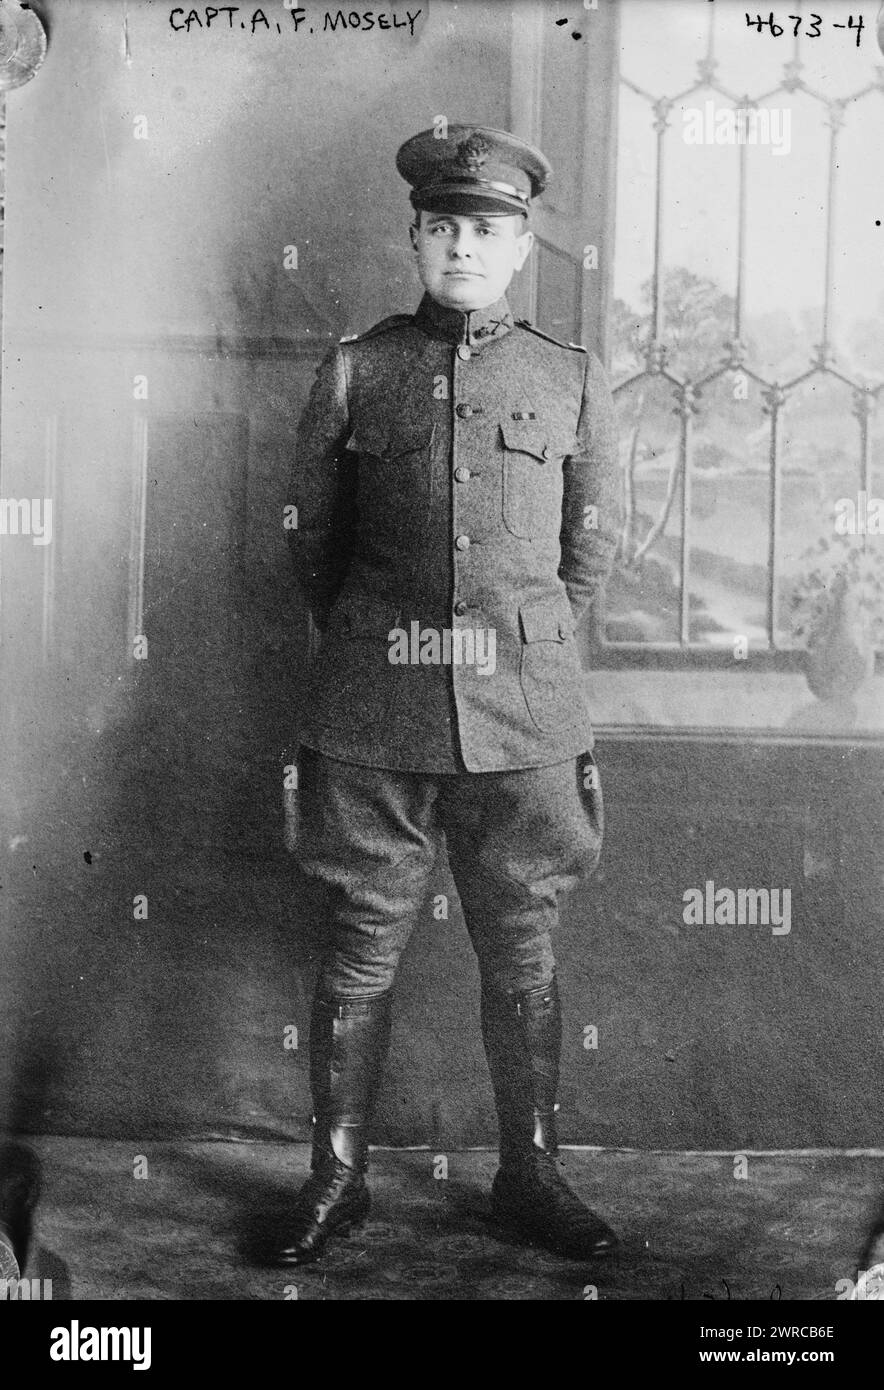 Capt. A.F. Mosely, Photograph shows Captain Arthur Francis Mosely (1877-1918), a minister in civilian life, who joined the British Army in the Boer War, served as a sergeant in the U.S. Cavalry during the Spanish-American War, and then again enlisted, being sent to France where he was killed in action on July 5, 1918., between ca. 1915 and 1918, Glass negatives, 1 negative: glass Stock Photo